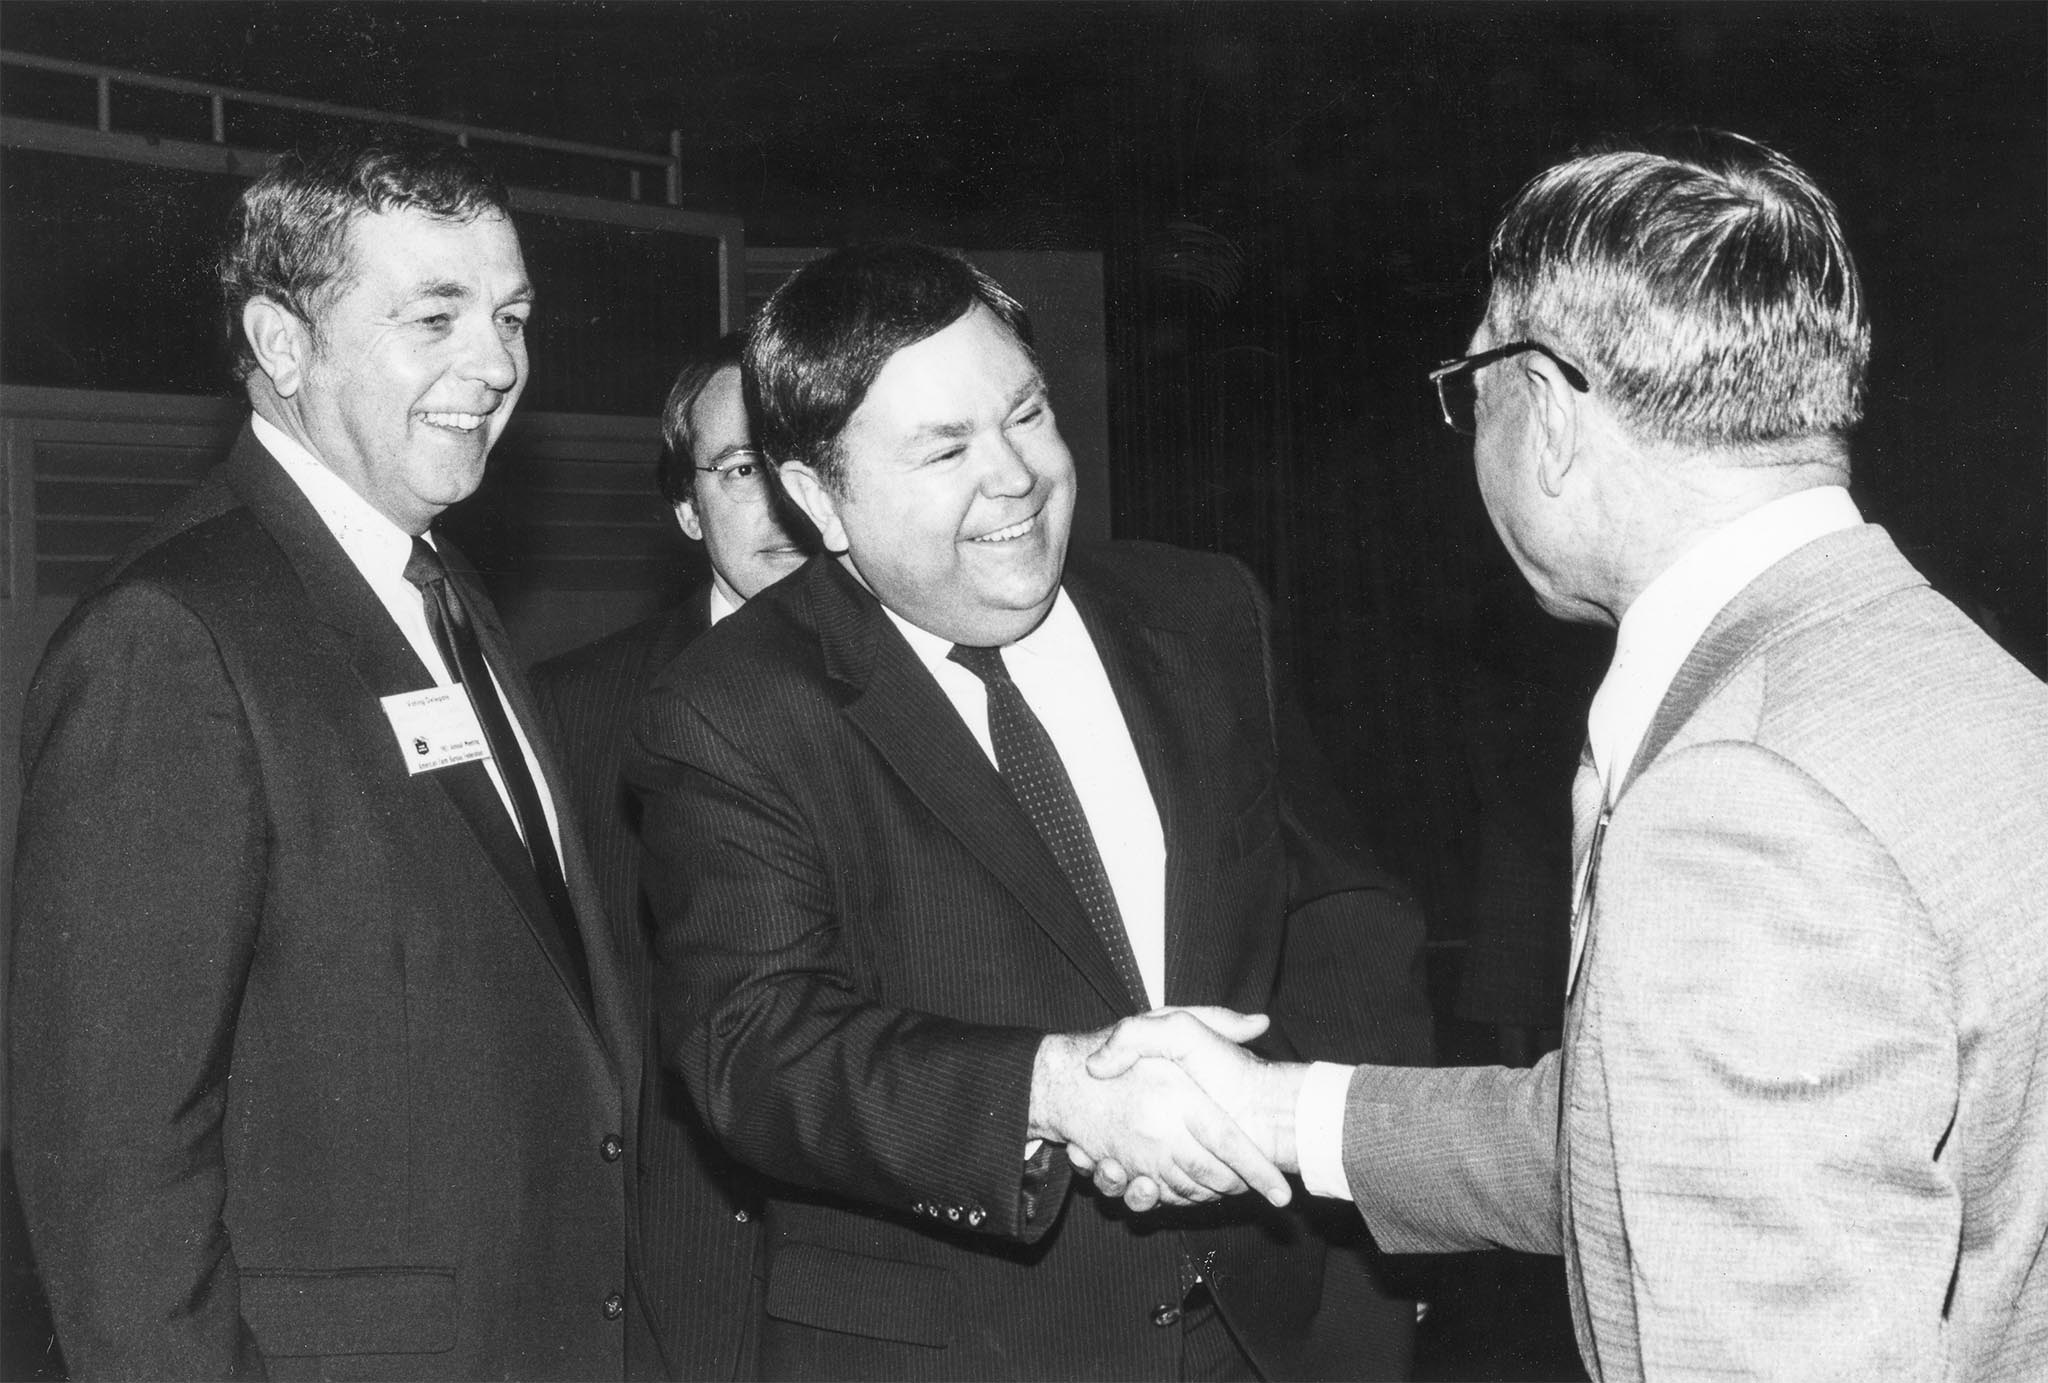 This photo, taken at the 1983 American Farm Bureau Federation annual meeting in Dallas, shows U. S. Sen. David Boren (middle) shaking hands with fellow Oklahoman Emanuel Fuchs of Kiowa County (right), while AFBF President Robert Delano stands by. Boren, an Oklahoma democrat from Seminole, was one of the featured speakers at the conference. About 200 Farm Bureau leaders from Roger Mills, Custer, Washita, Beckham, Kiowa, Greer, Harmon, Jackson and Tillman counties attended the 1982 national meeting.